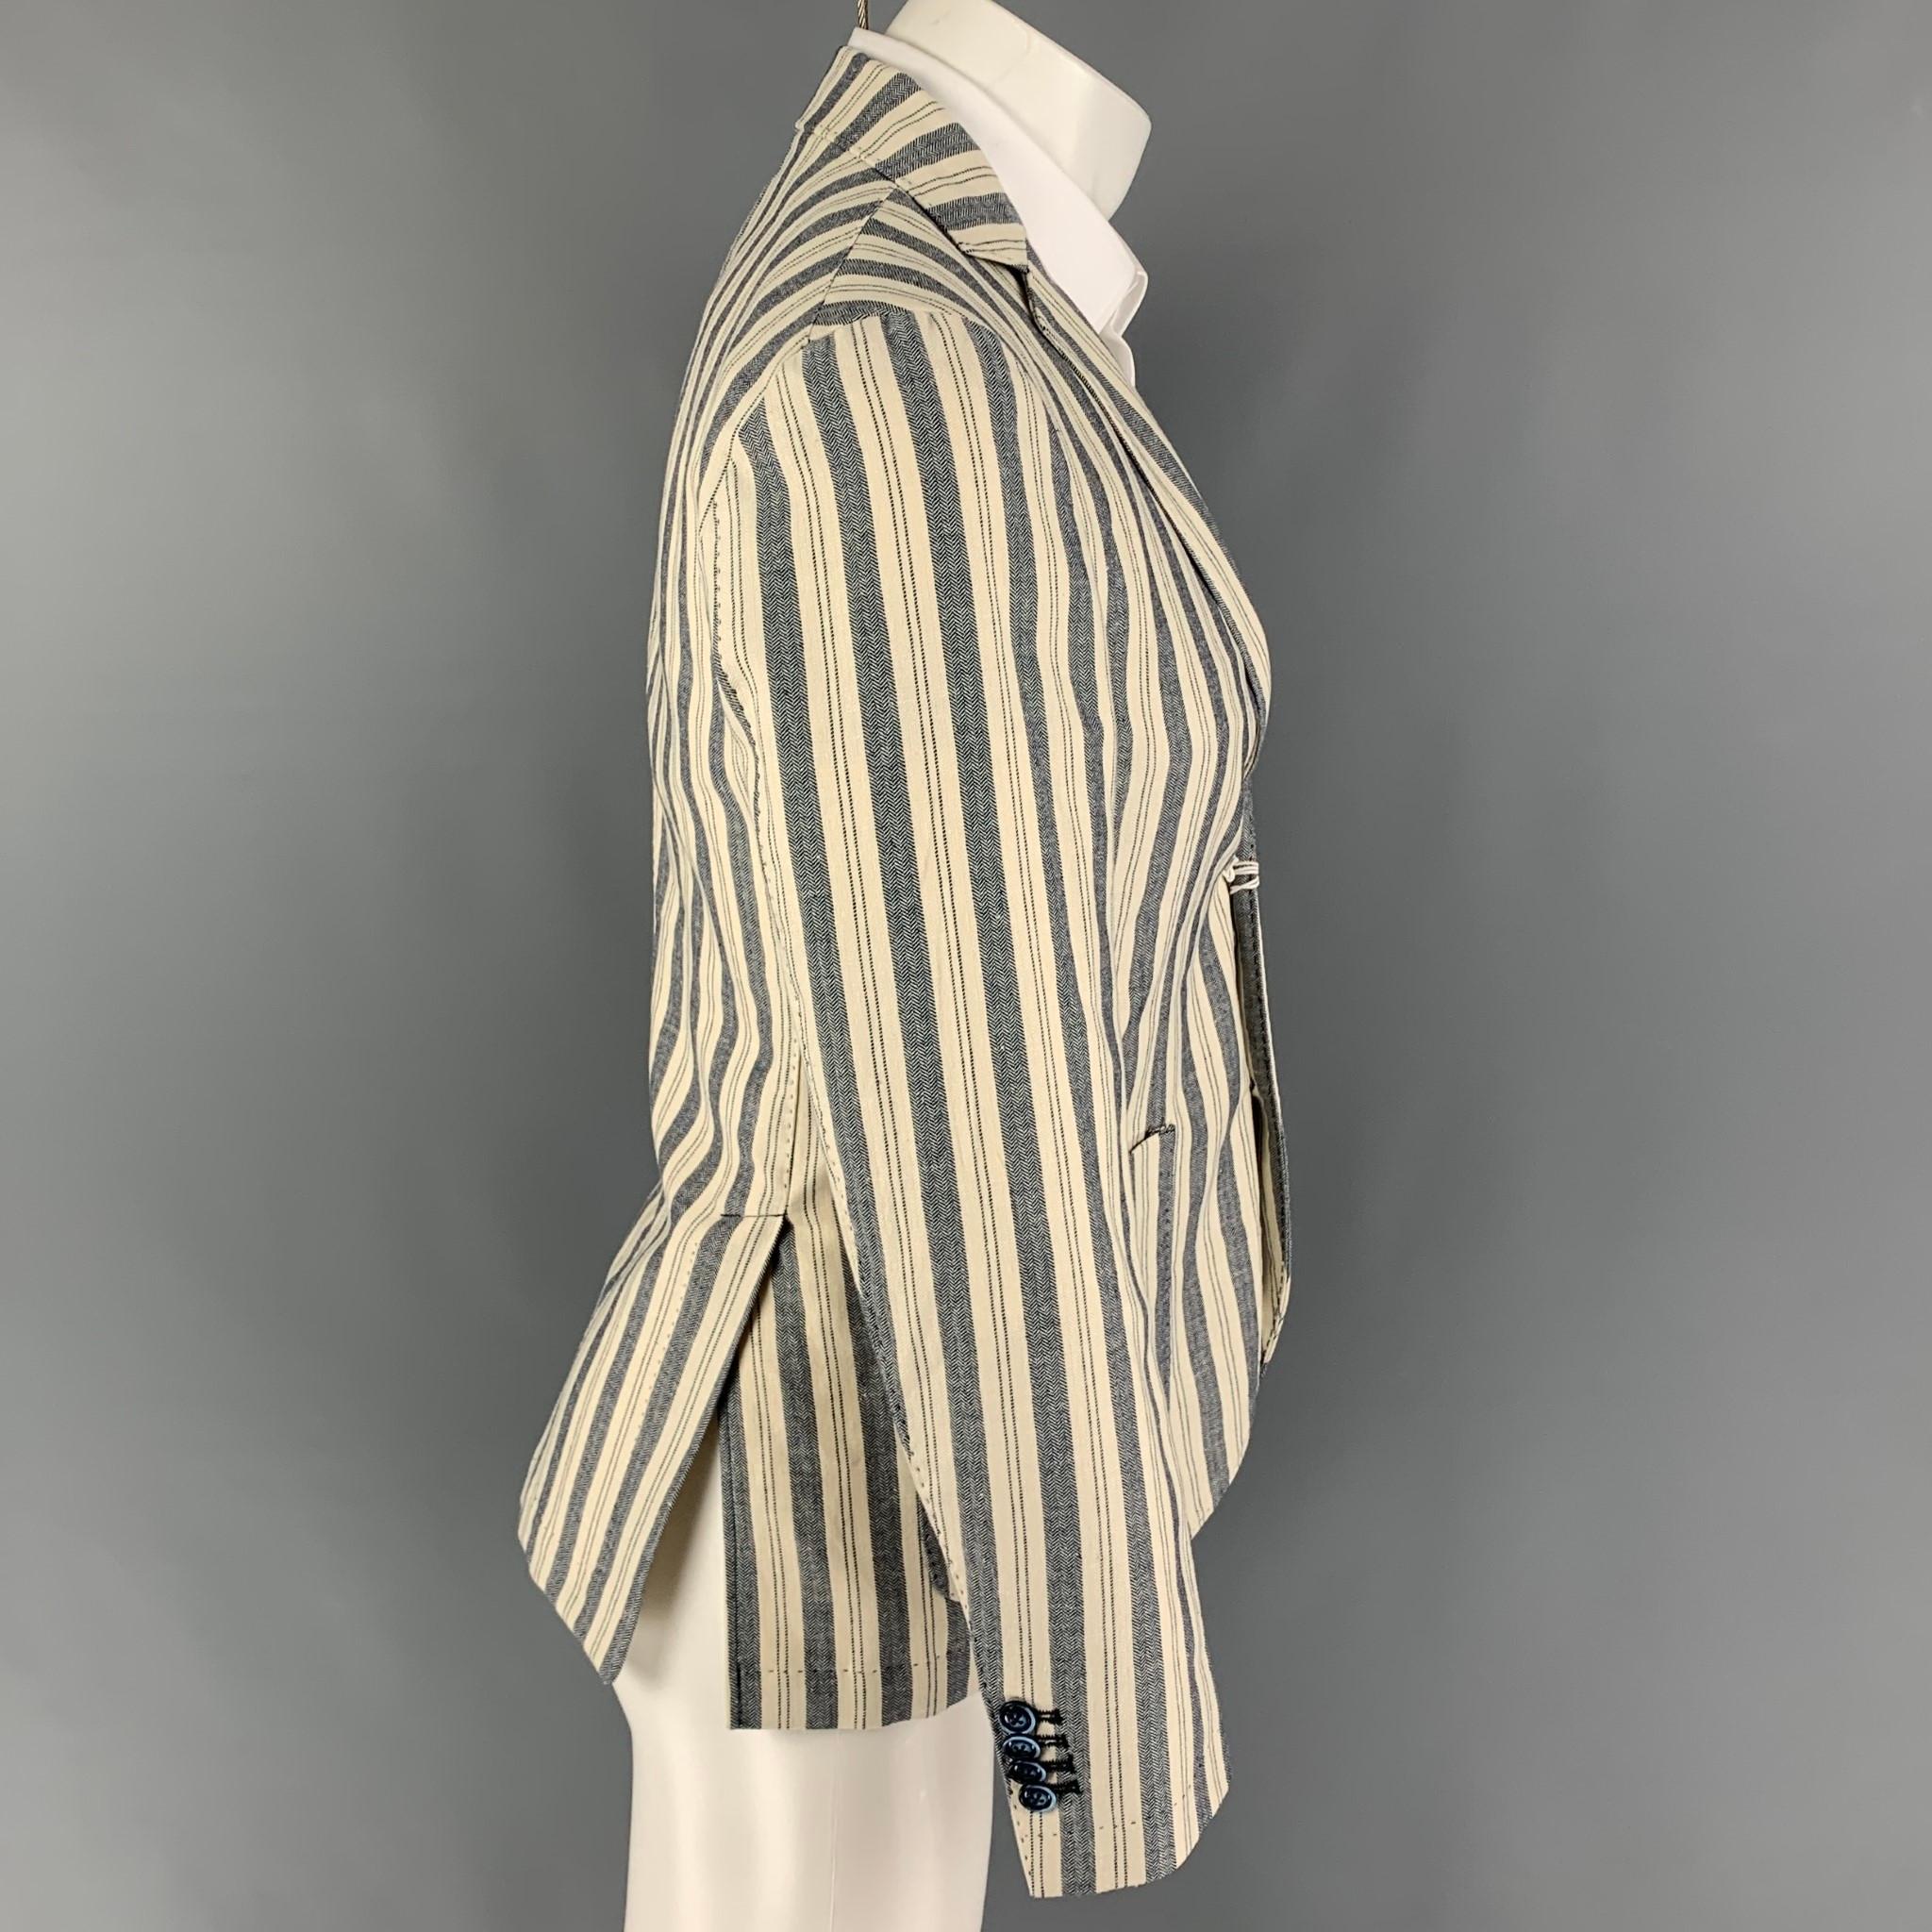 AT.P.CO sport coat comes in a beige & navy stripe cotton / linen featuring a notch lapel, patch pockets, double back vent, and a double button closure. 

New with tags. 
Marked: 46

Measurements:

Shoulder: 16.5 in.
Chest: 36 in.
Sleeve: 24.5